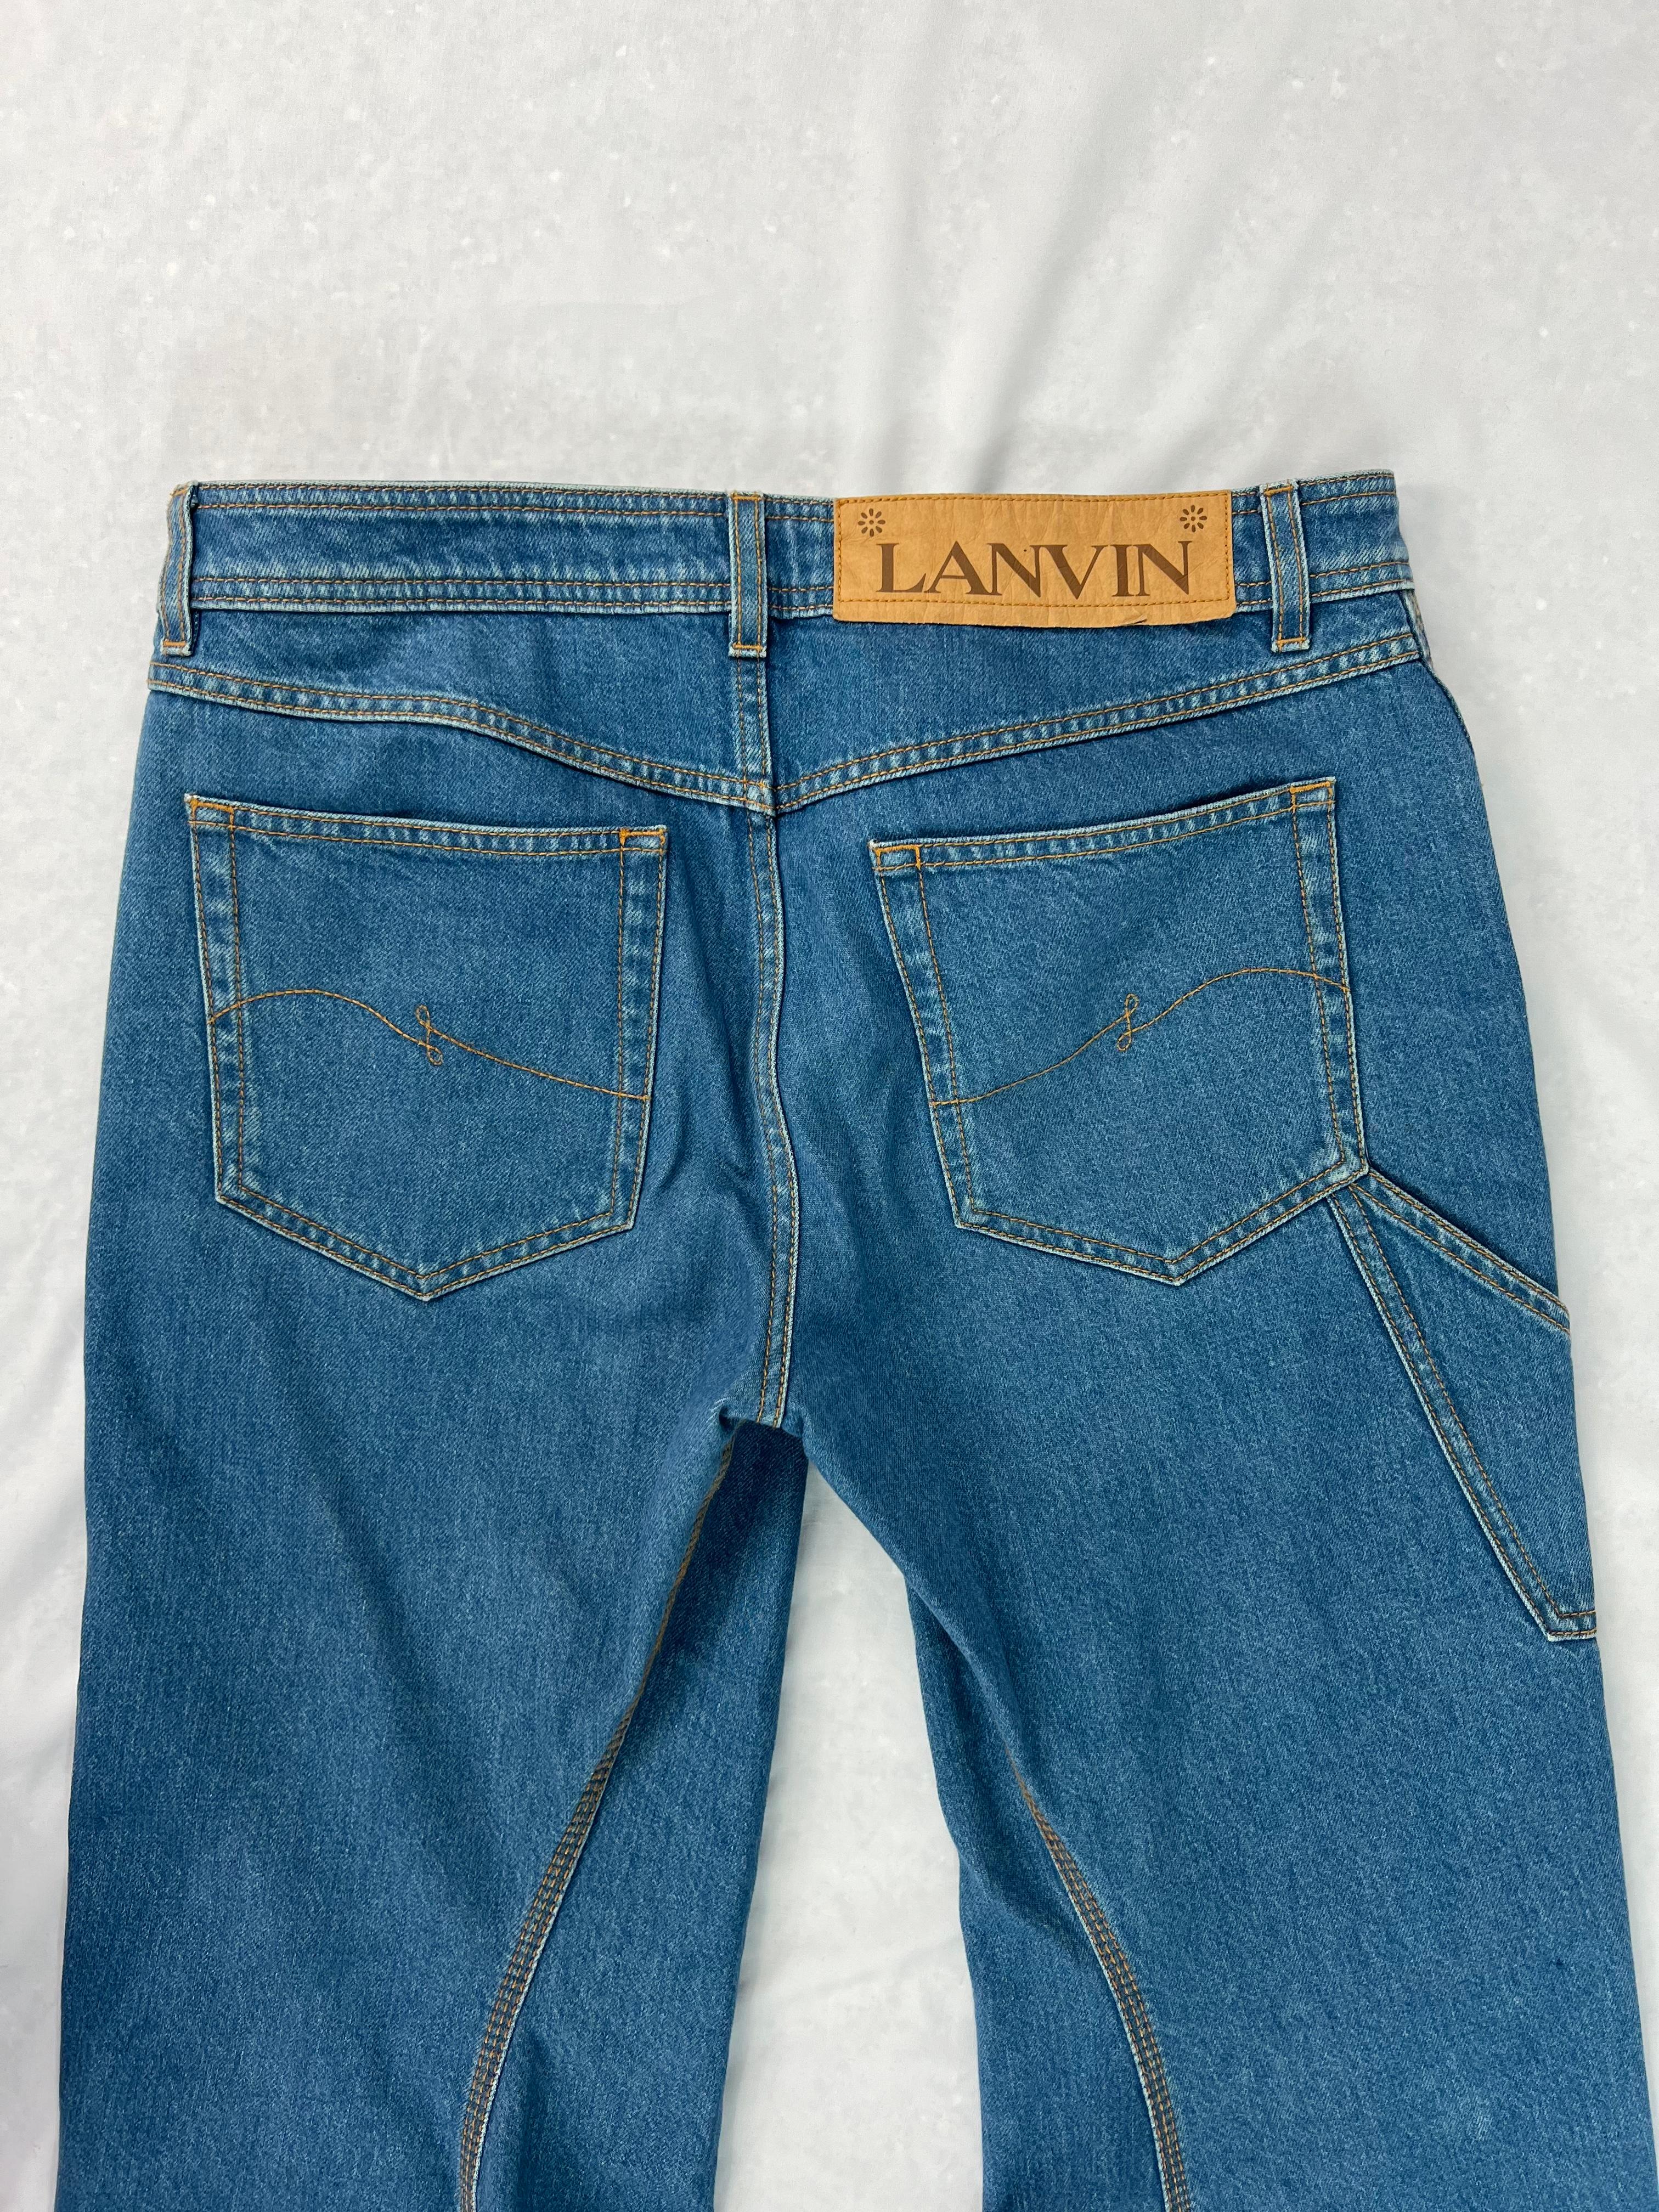 Lanvin Blue Denim Jean Pants, Size 40 In Excellent Condition For Sale In Beverly Hills, CA